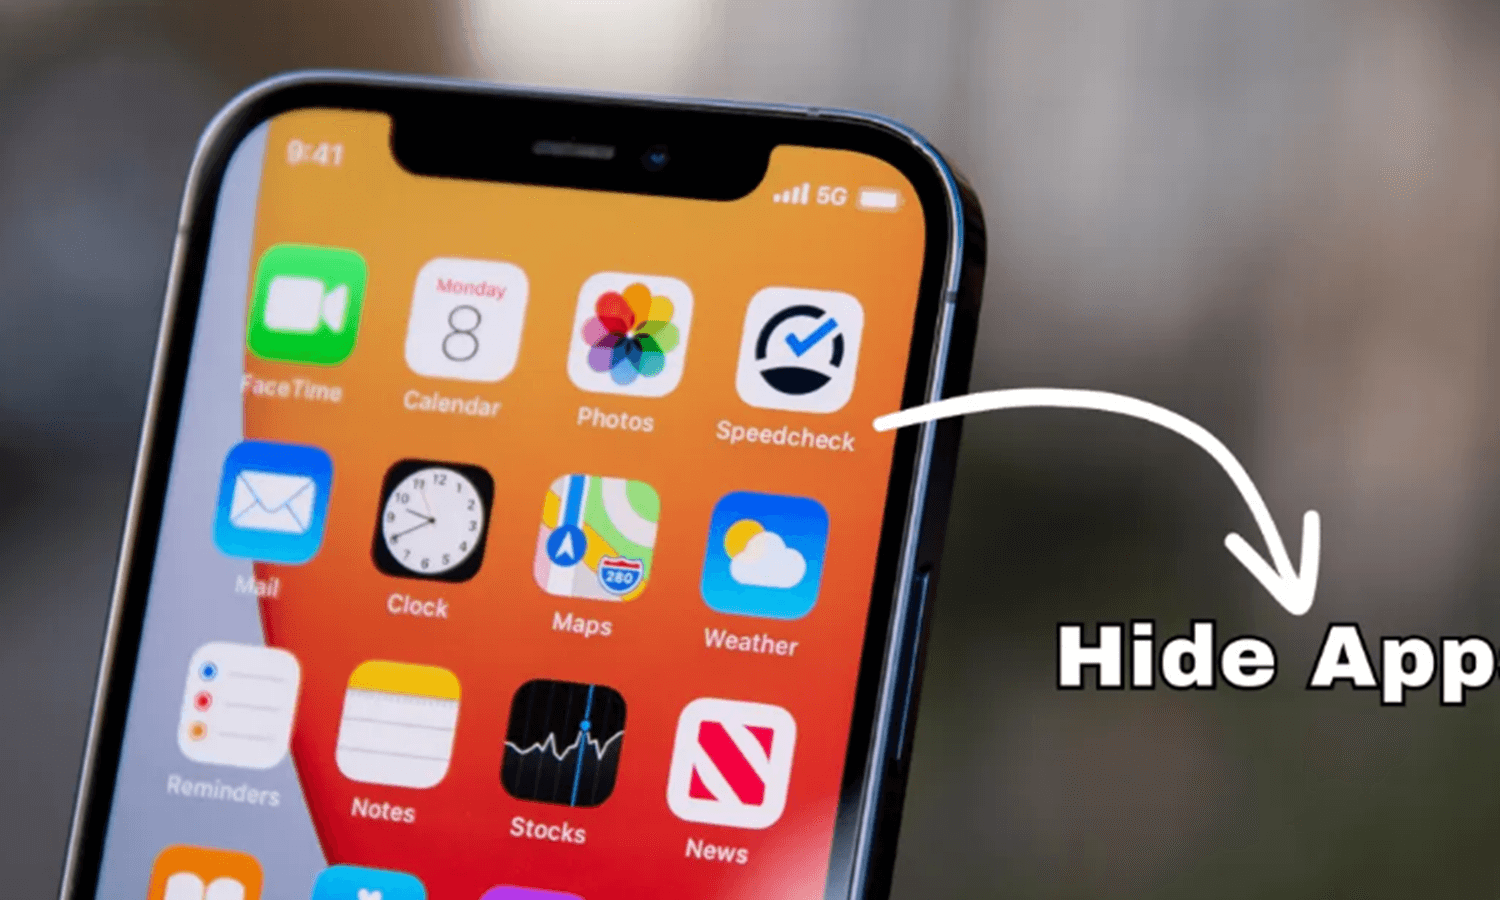 How To Hide Apps on IPhone